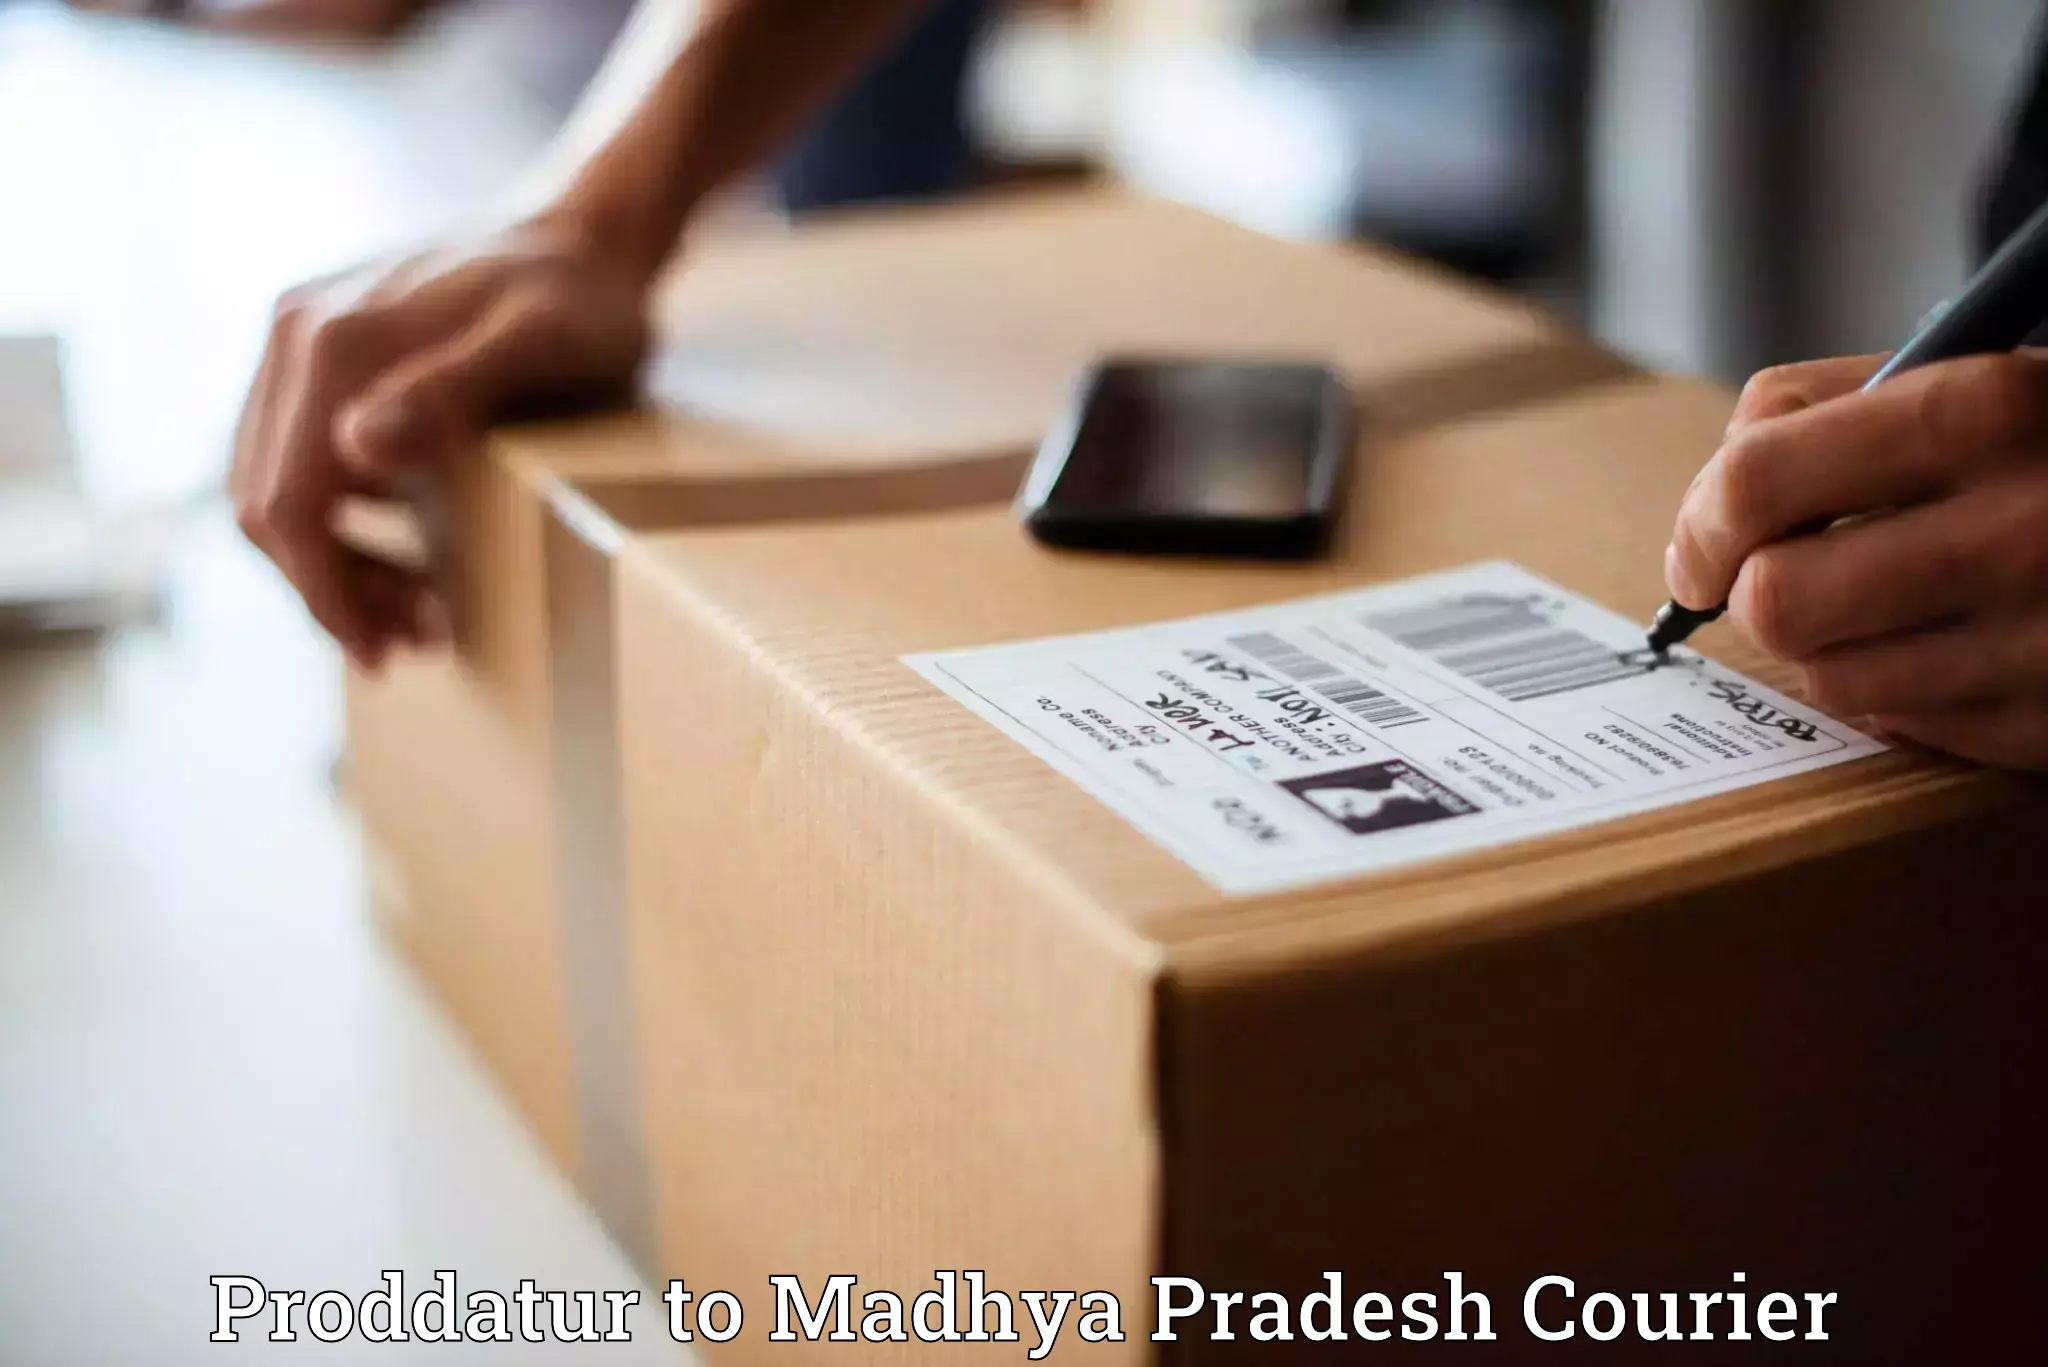 Express delivery network Proddatur to IIT Indore